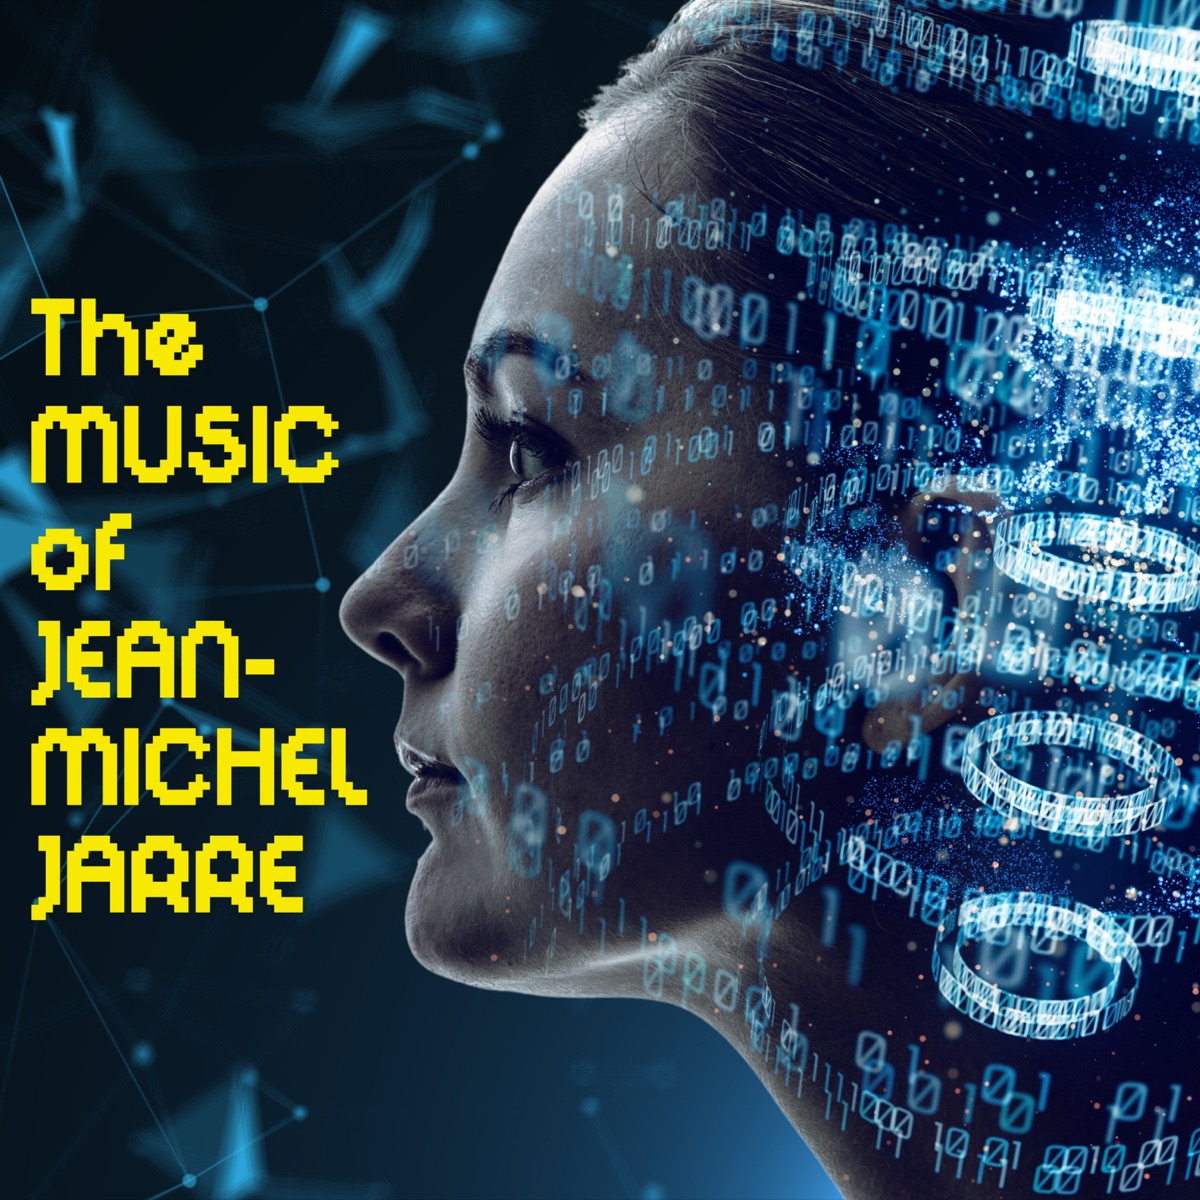 The Music of Jean-Michel Jarre by Synthergy on Apple Music